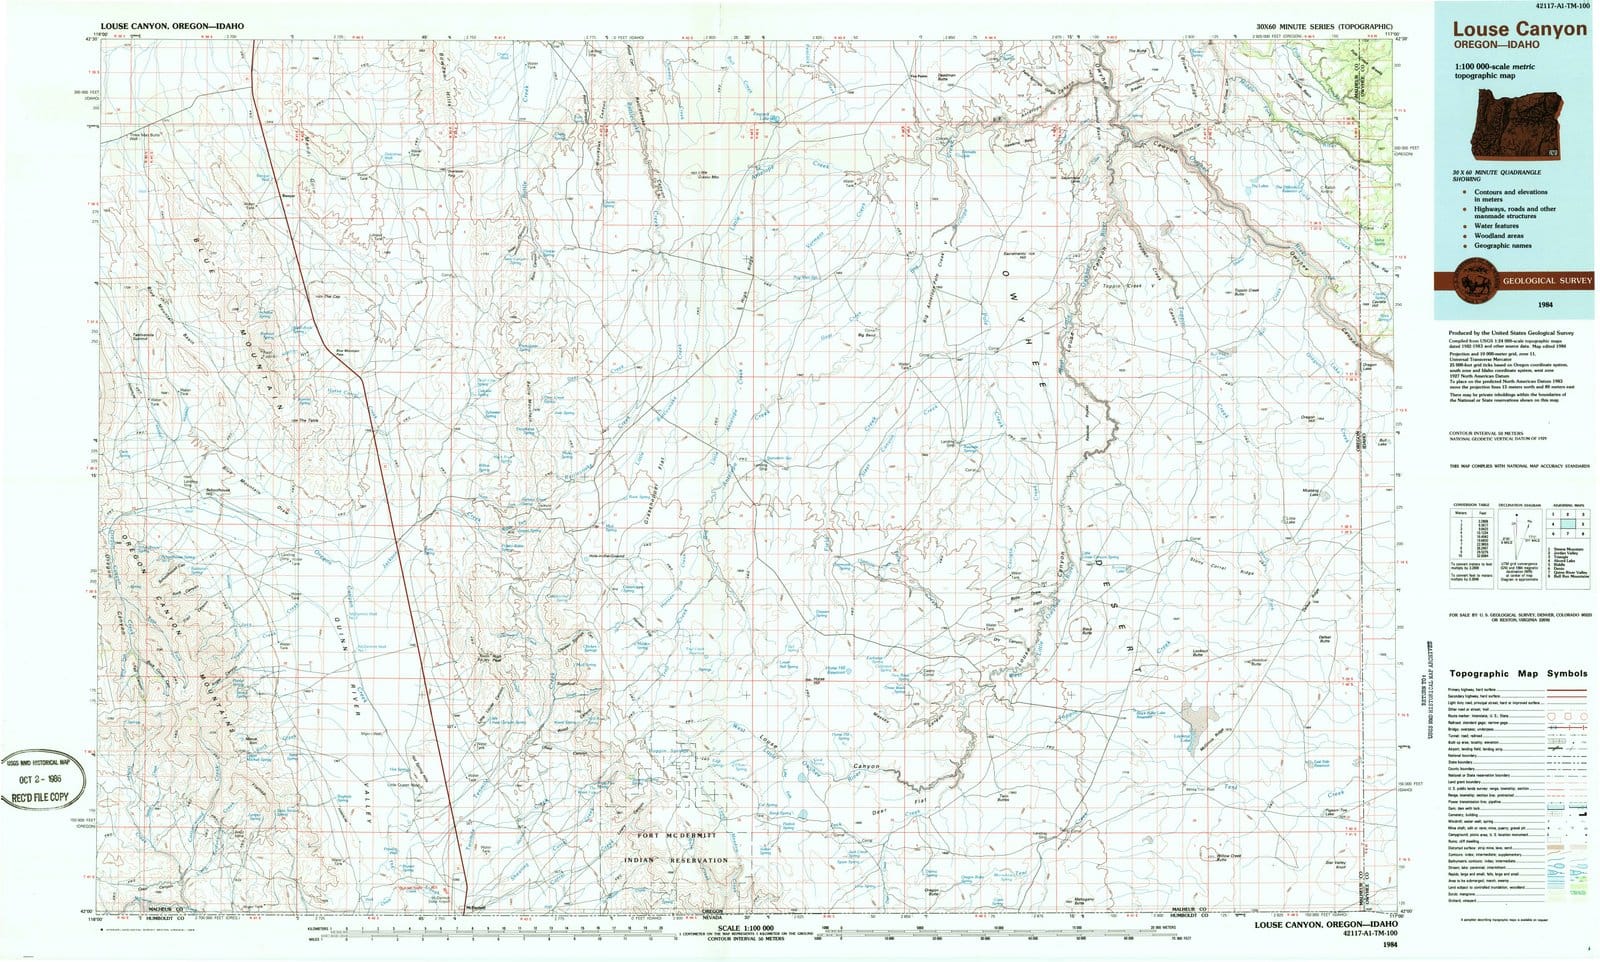 1984 Louse Canyon, OR - Oregon - USGS Topographic Map